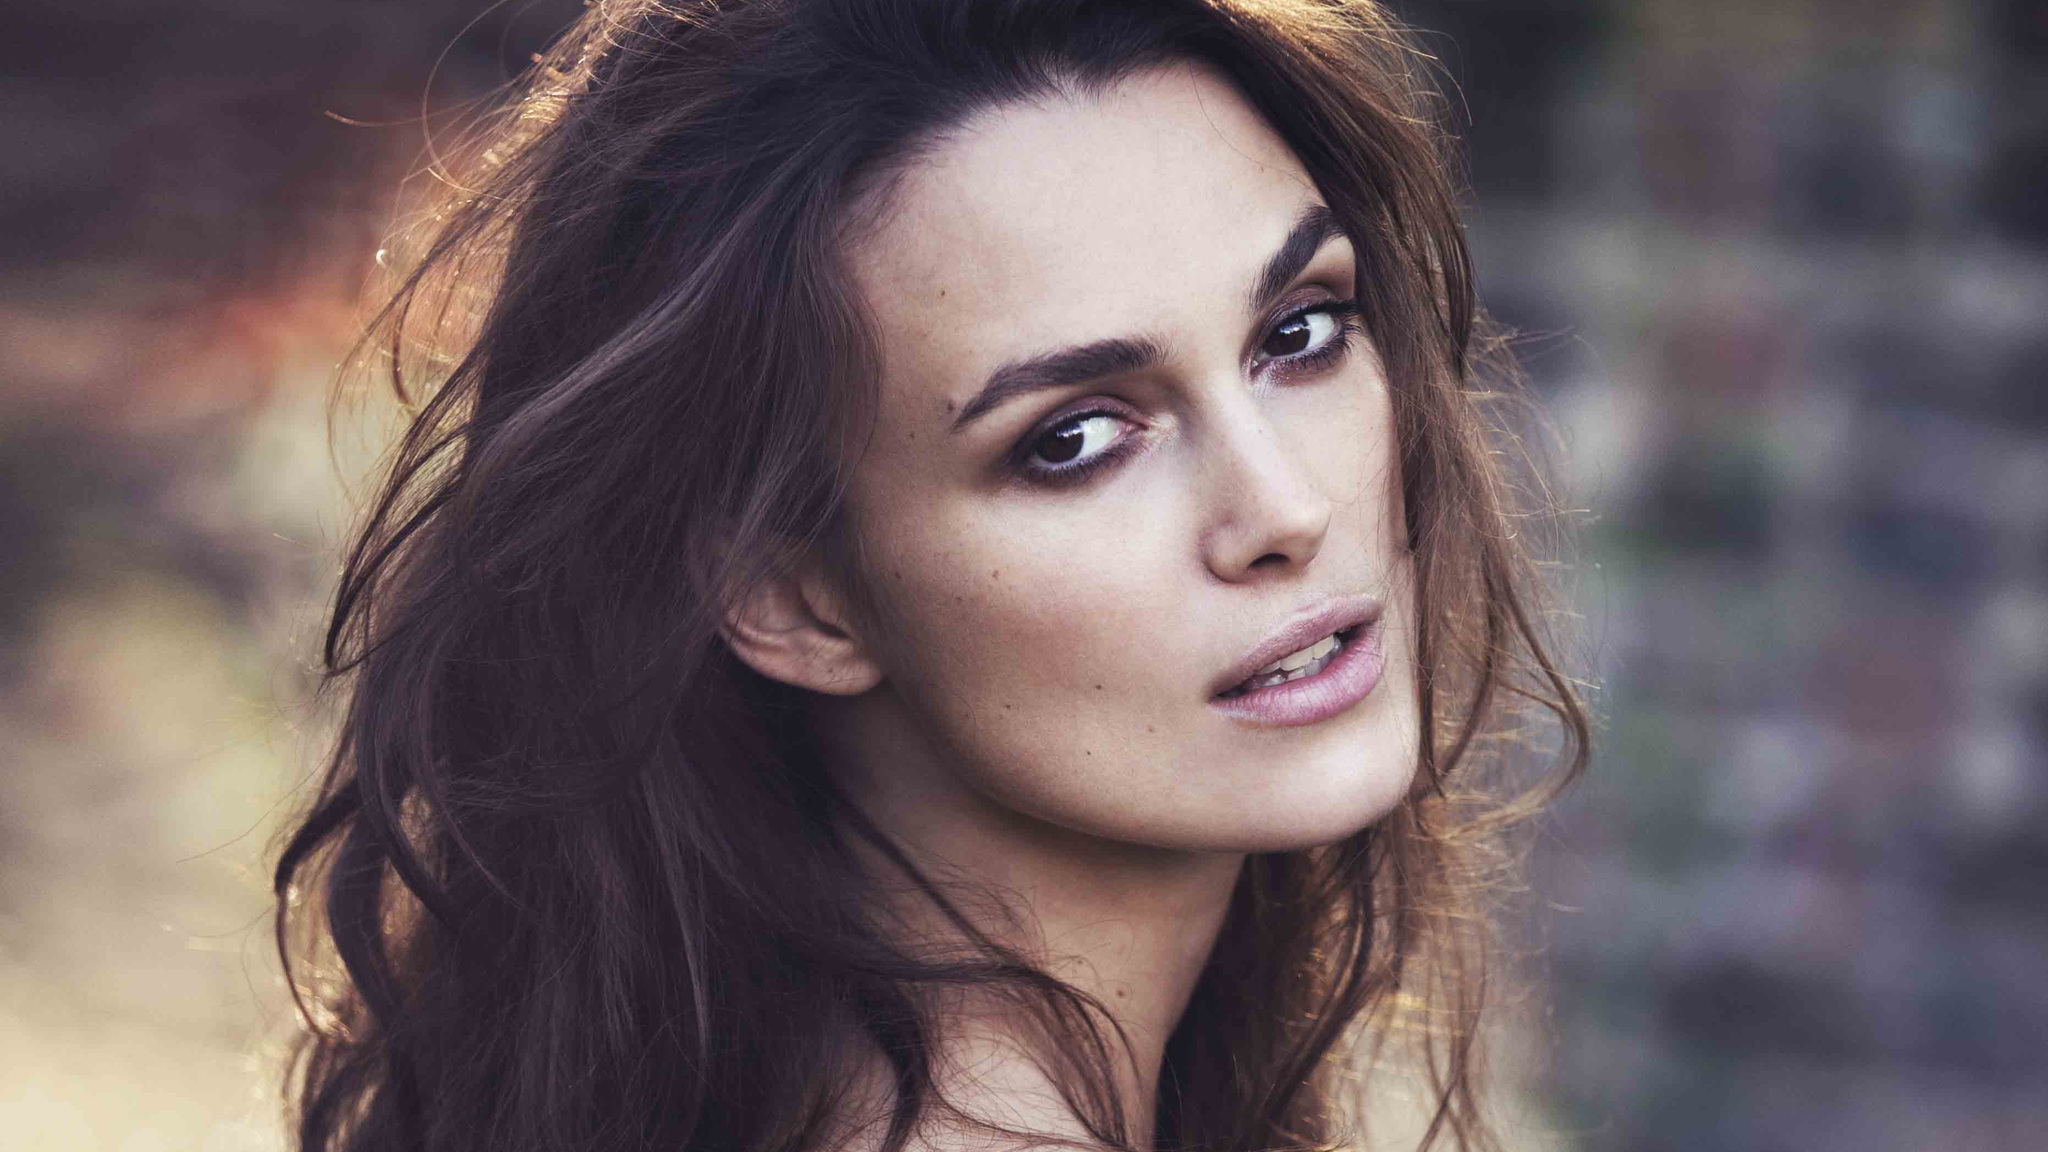 People 2048x1152 women actress Keira Knightley face